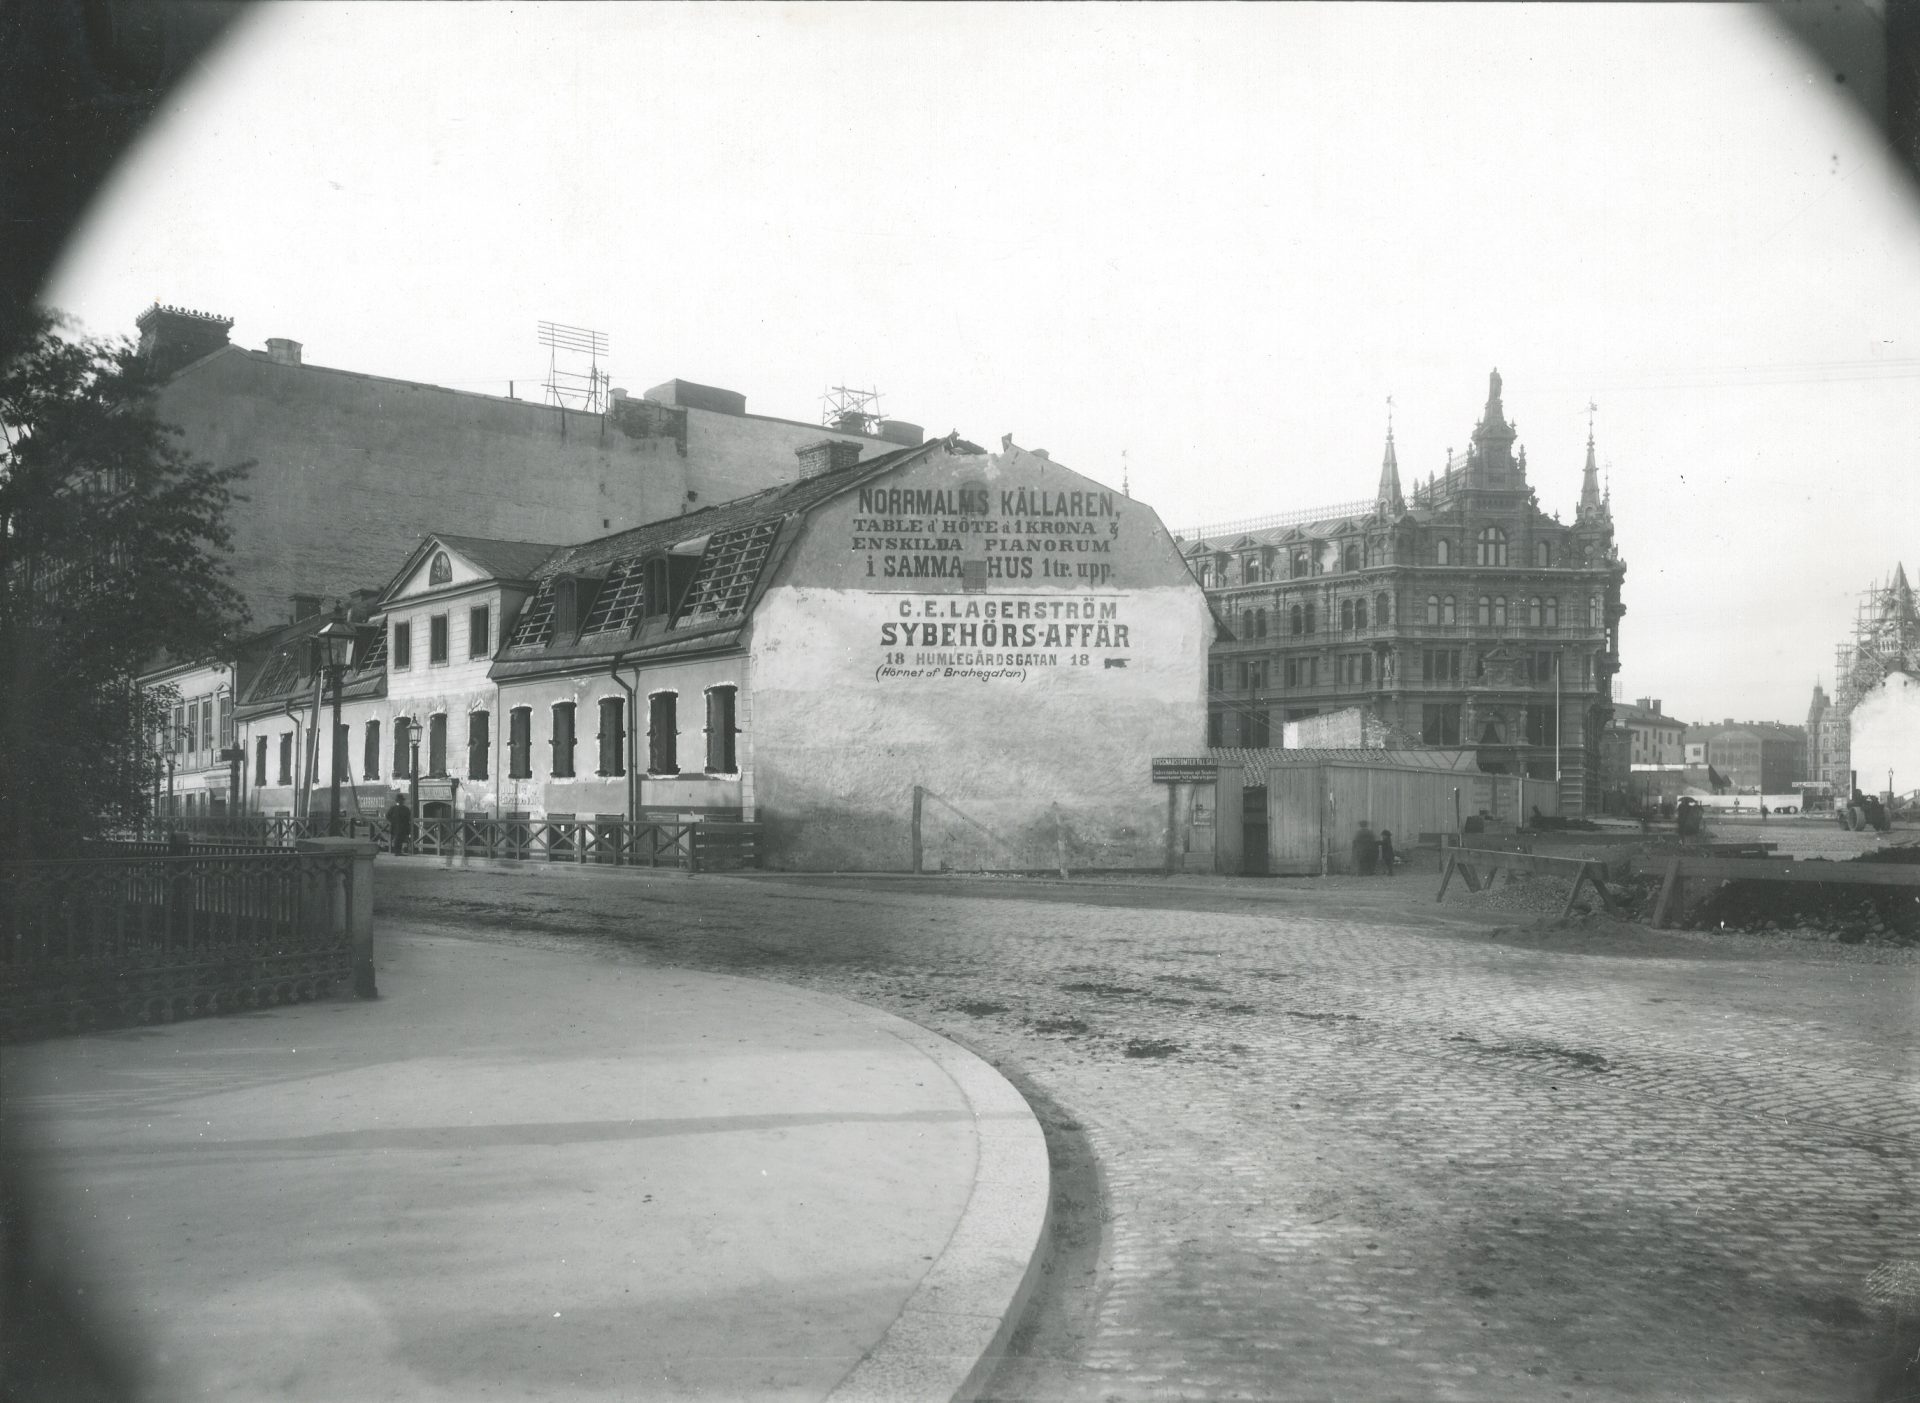 A black and white photo of an elongated building with advertising text on one end. 